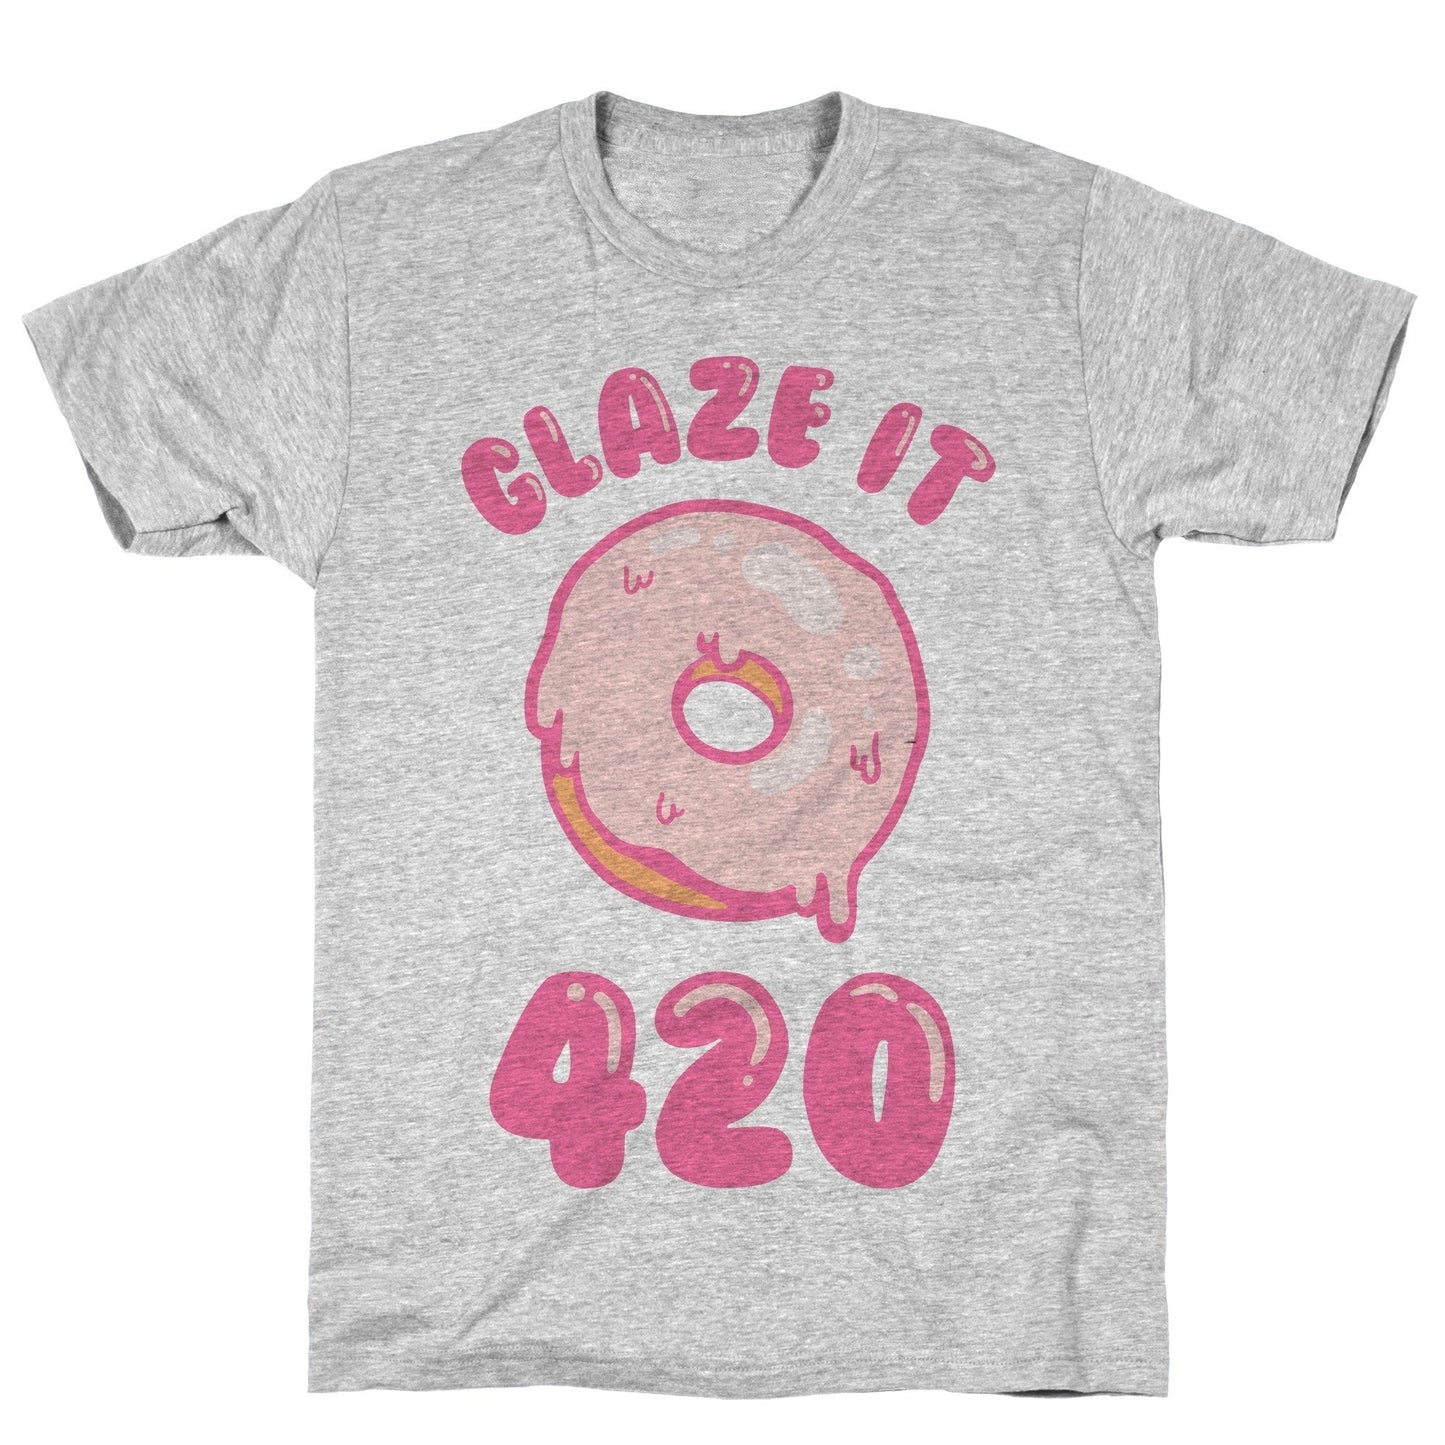 Glaze It 420 Donut Athletic Gray Unisex Cotton Tee Flower Power Packages Gray XL 